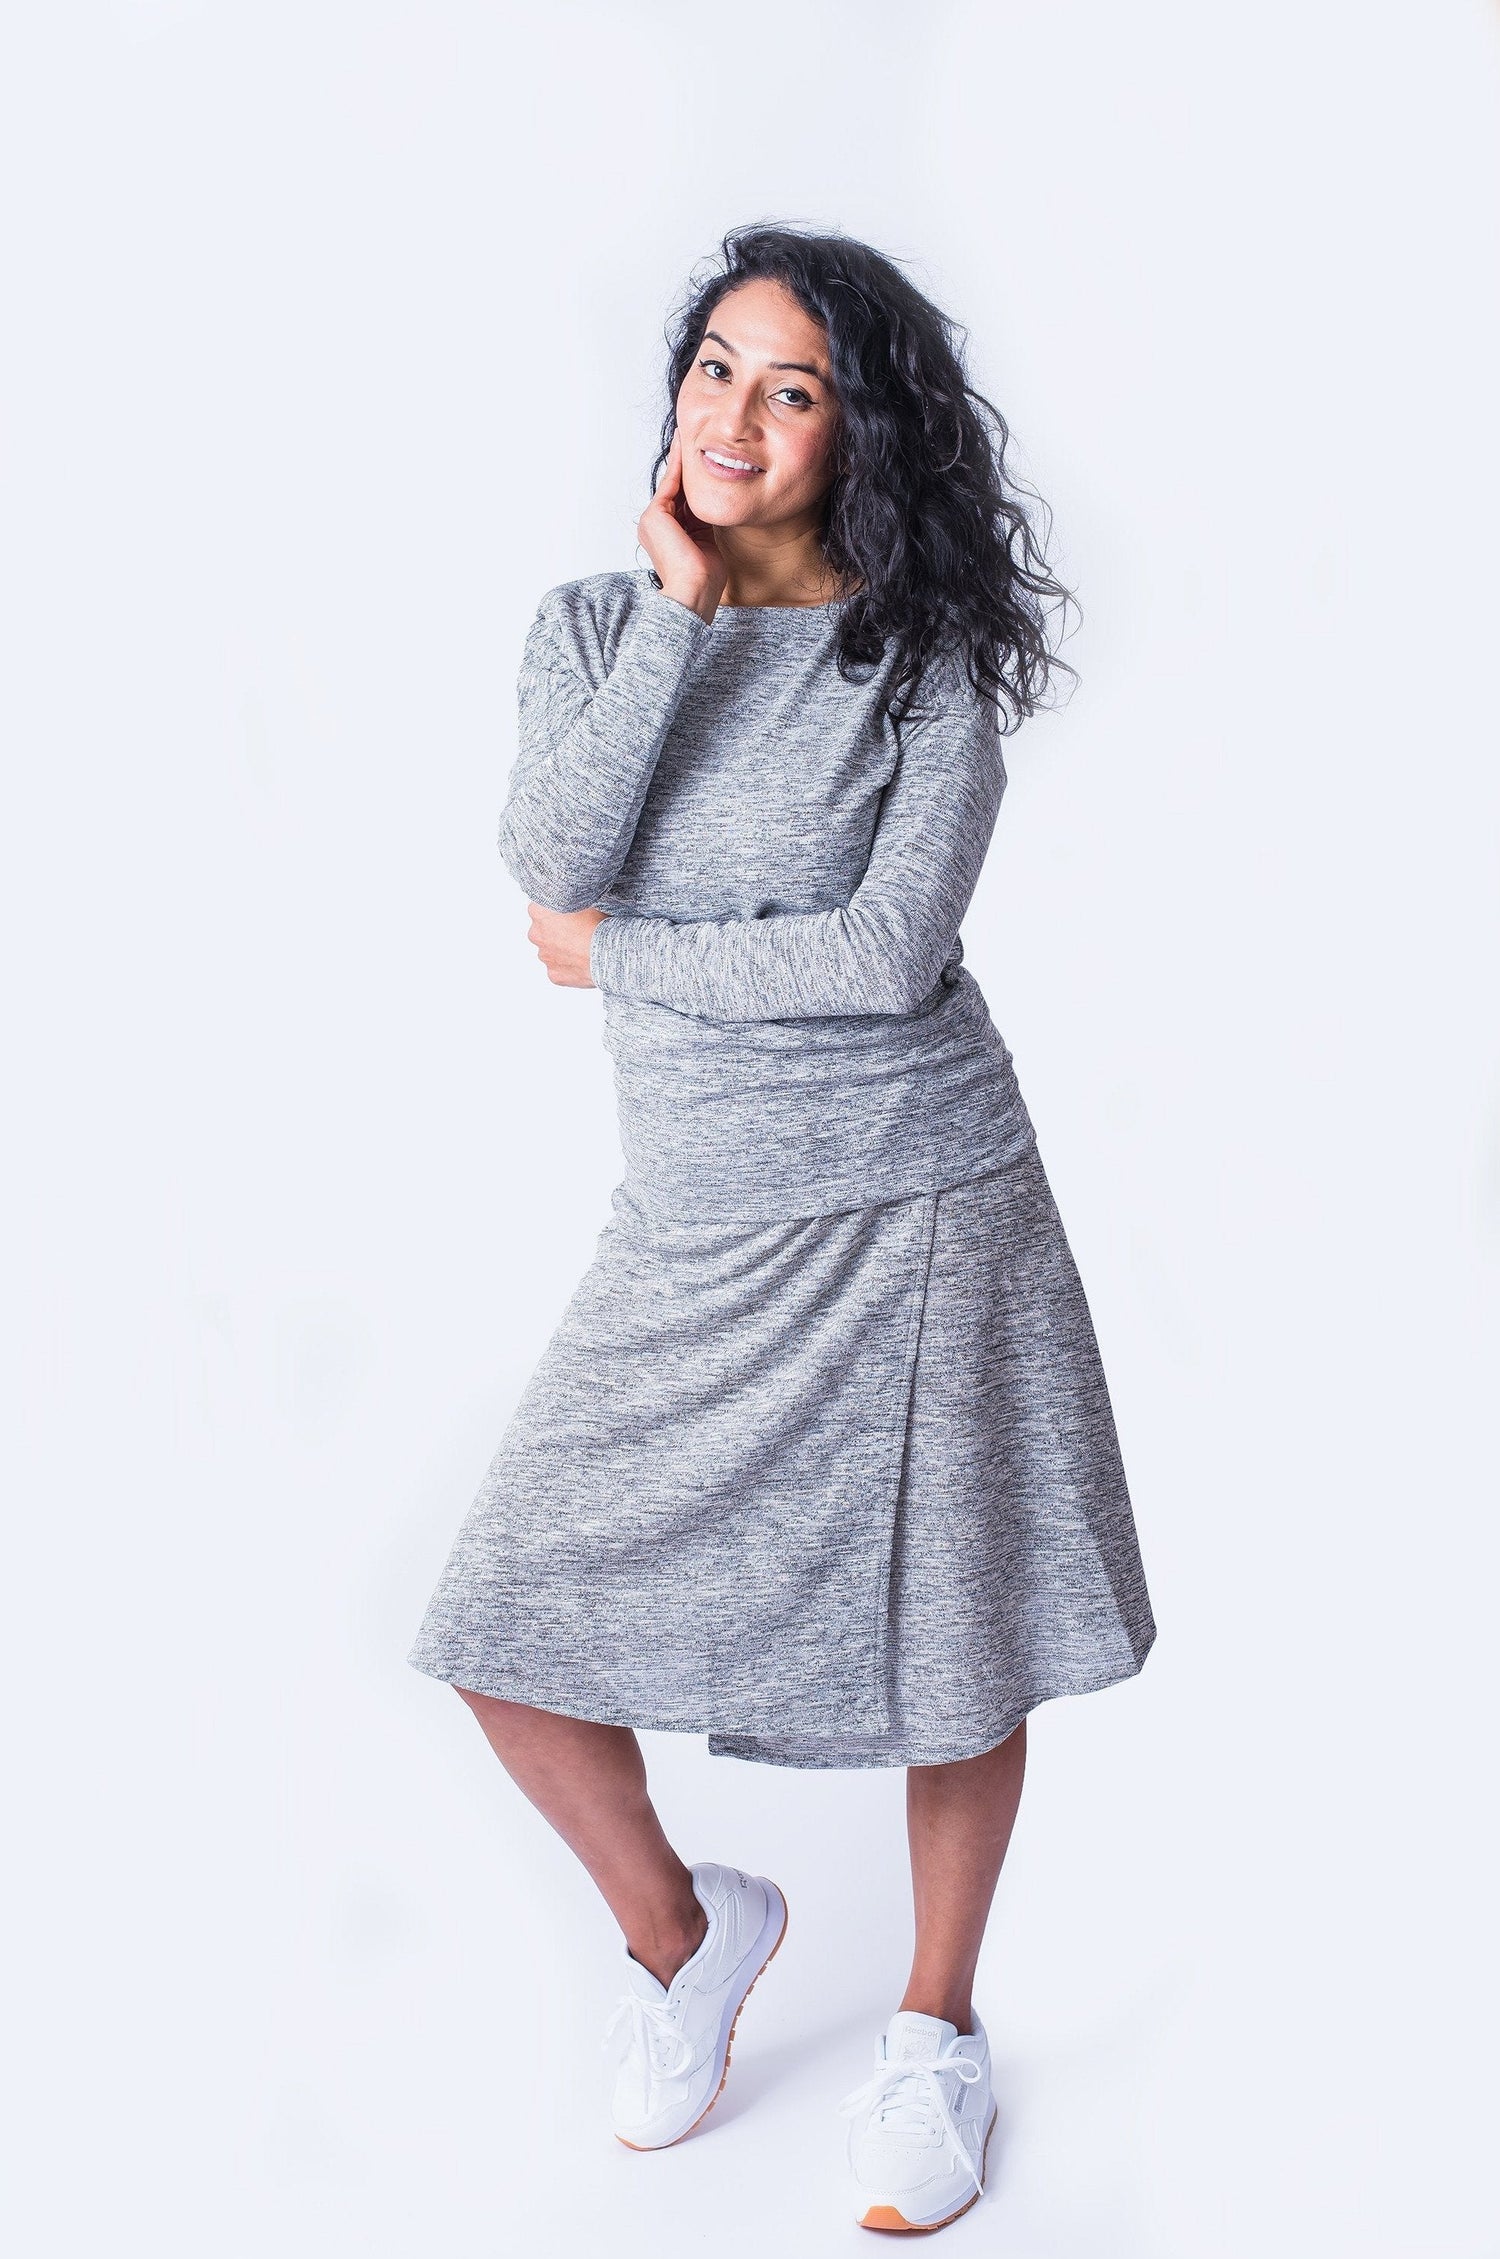 Woman posing wearing grey long sleeve top with shoulder snap closures and matching grey skirt.